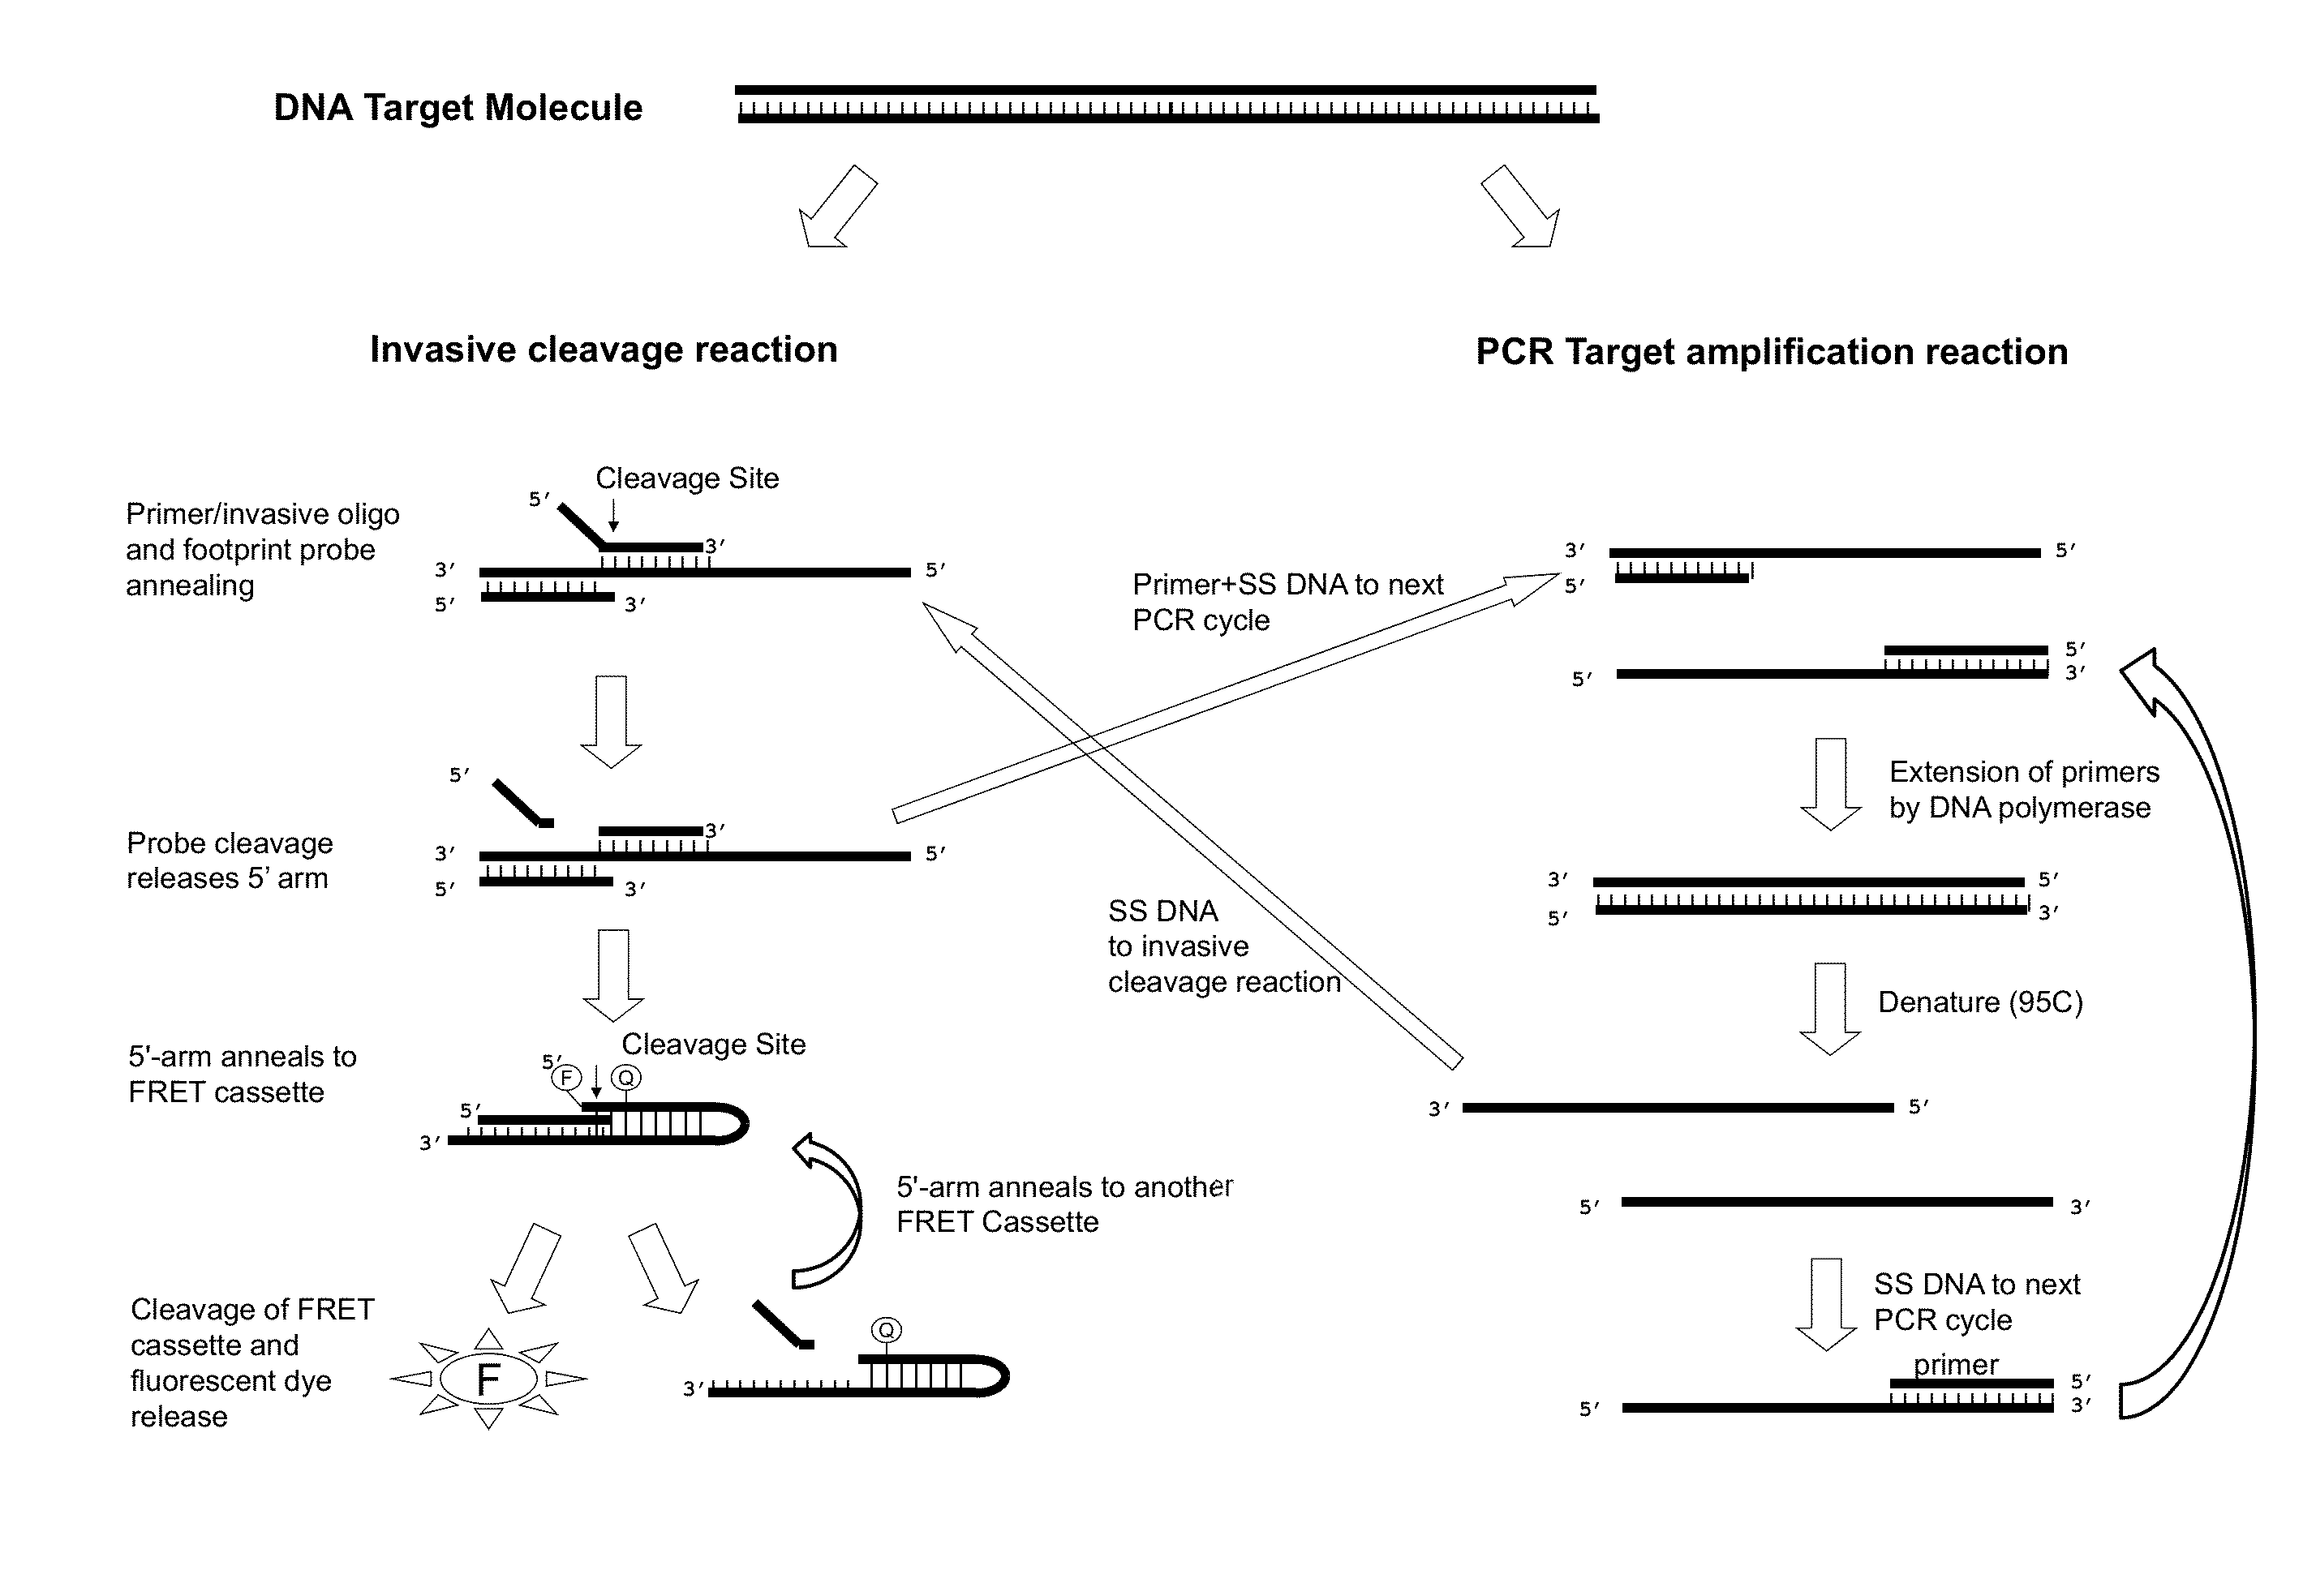 Normalization of polymerase activity